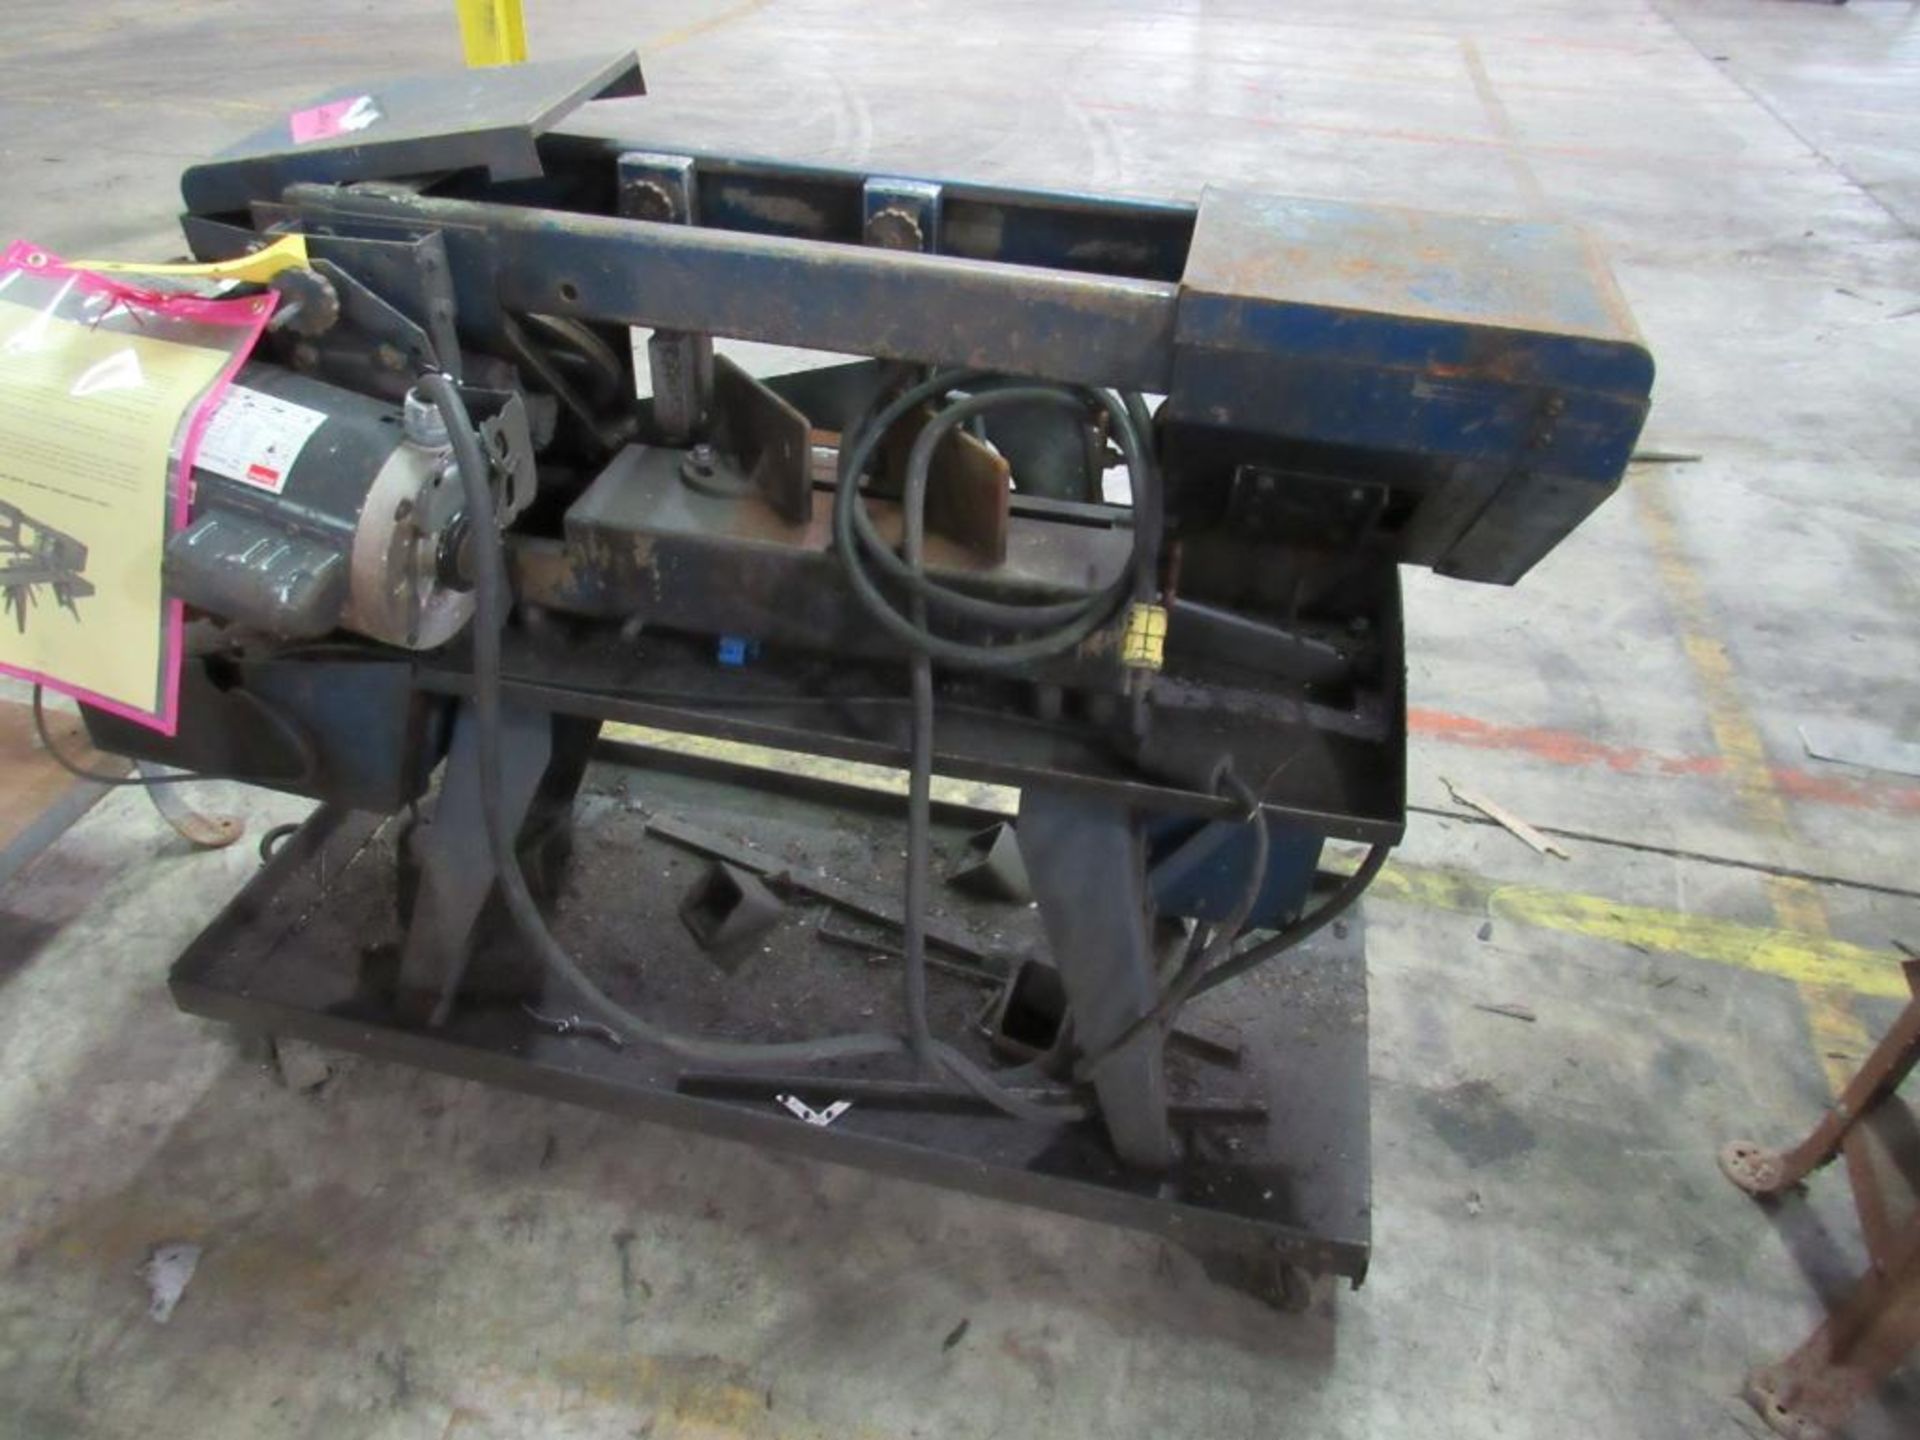 Horizontal Band Saw (Shipping) (LOCATED IN SOUTH MILWAUKEE, WI)